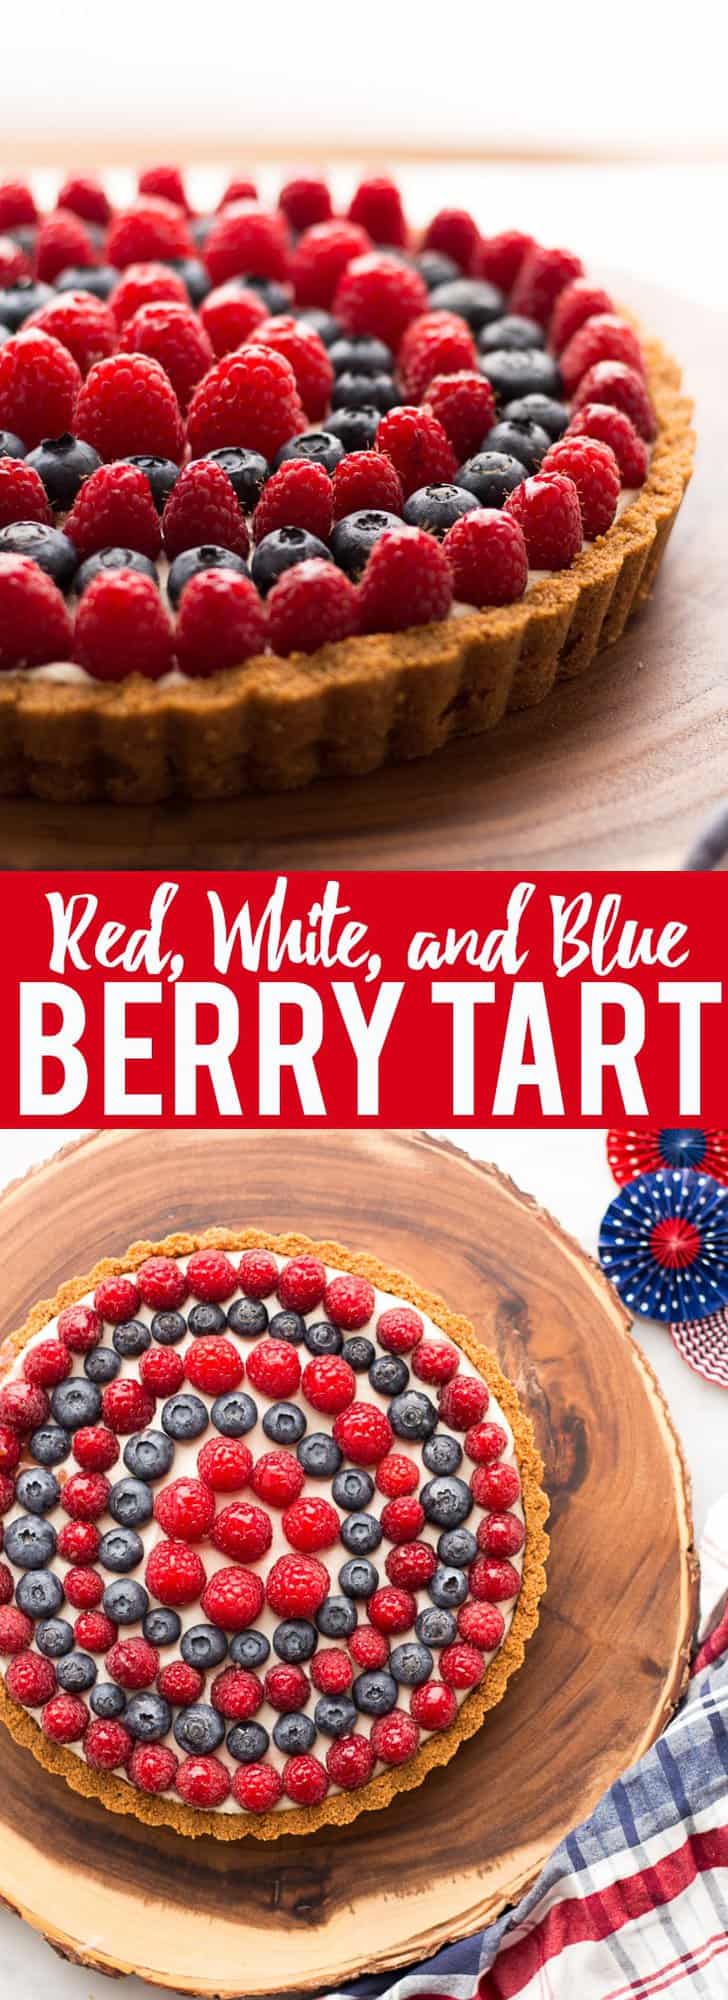 This Red, White and Blueberry Tart is a fresh berry tart perfect for 4th of July or any summer day! Fresh berries, a sweet creamy filling and a graham cracker crust make this simple and delicious tart a total winner!